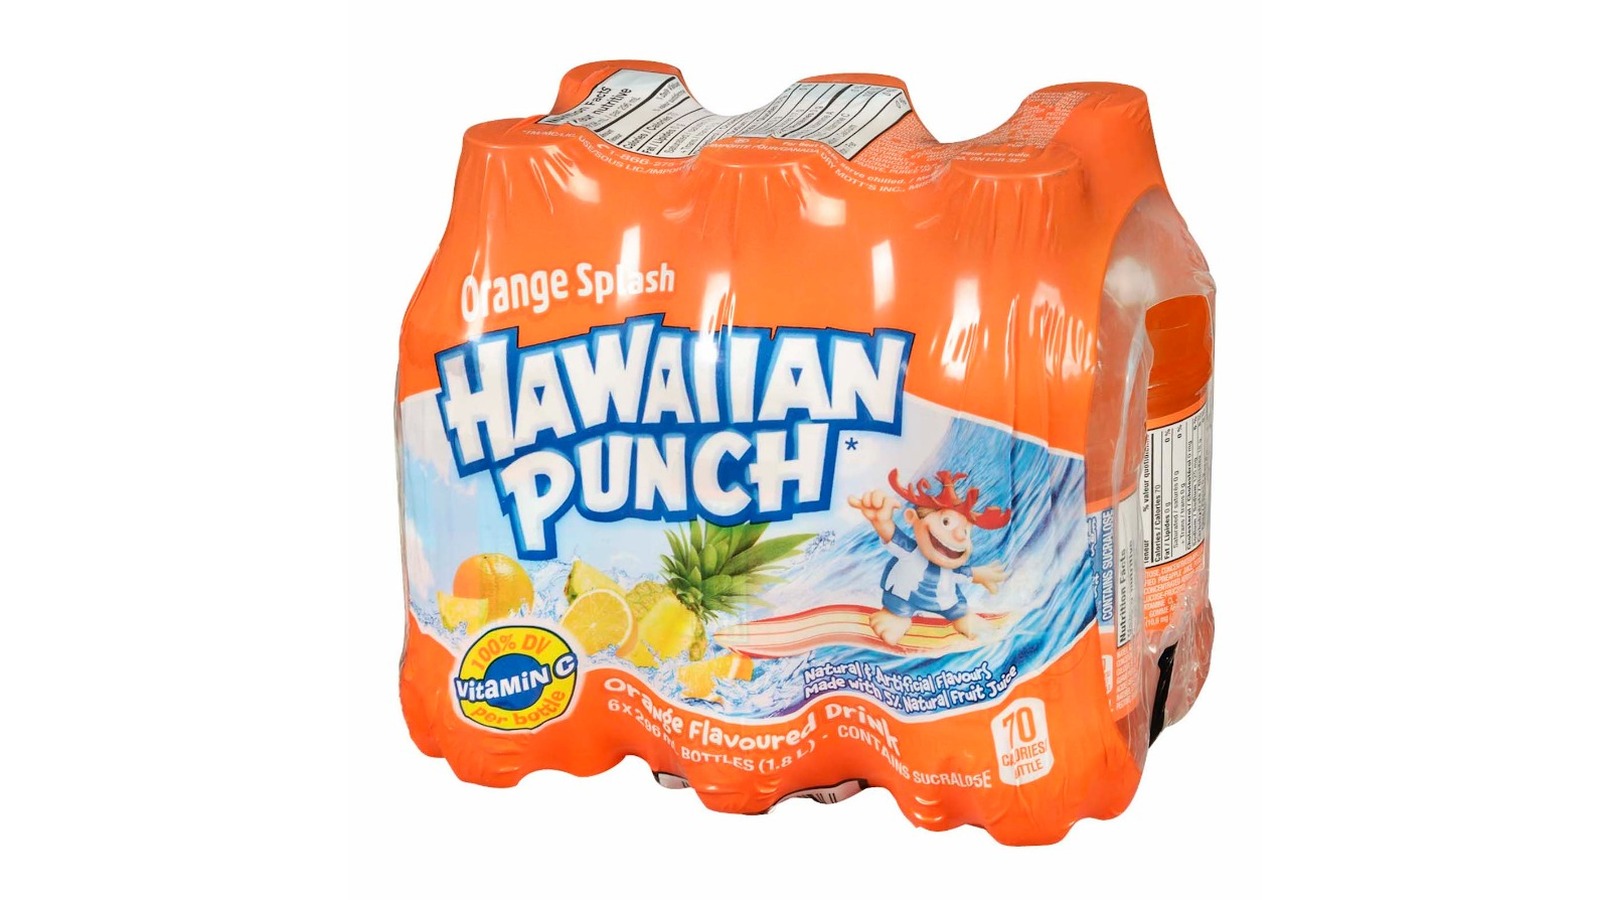 Hawaiian Punch Unexpectedly Originated As An Ice Cream Topping